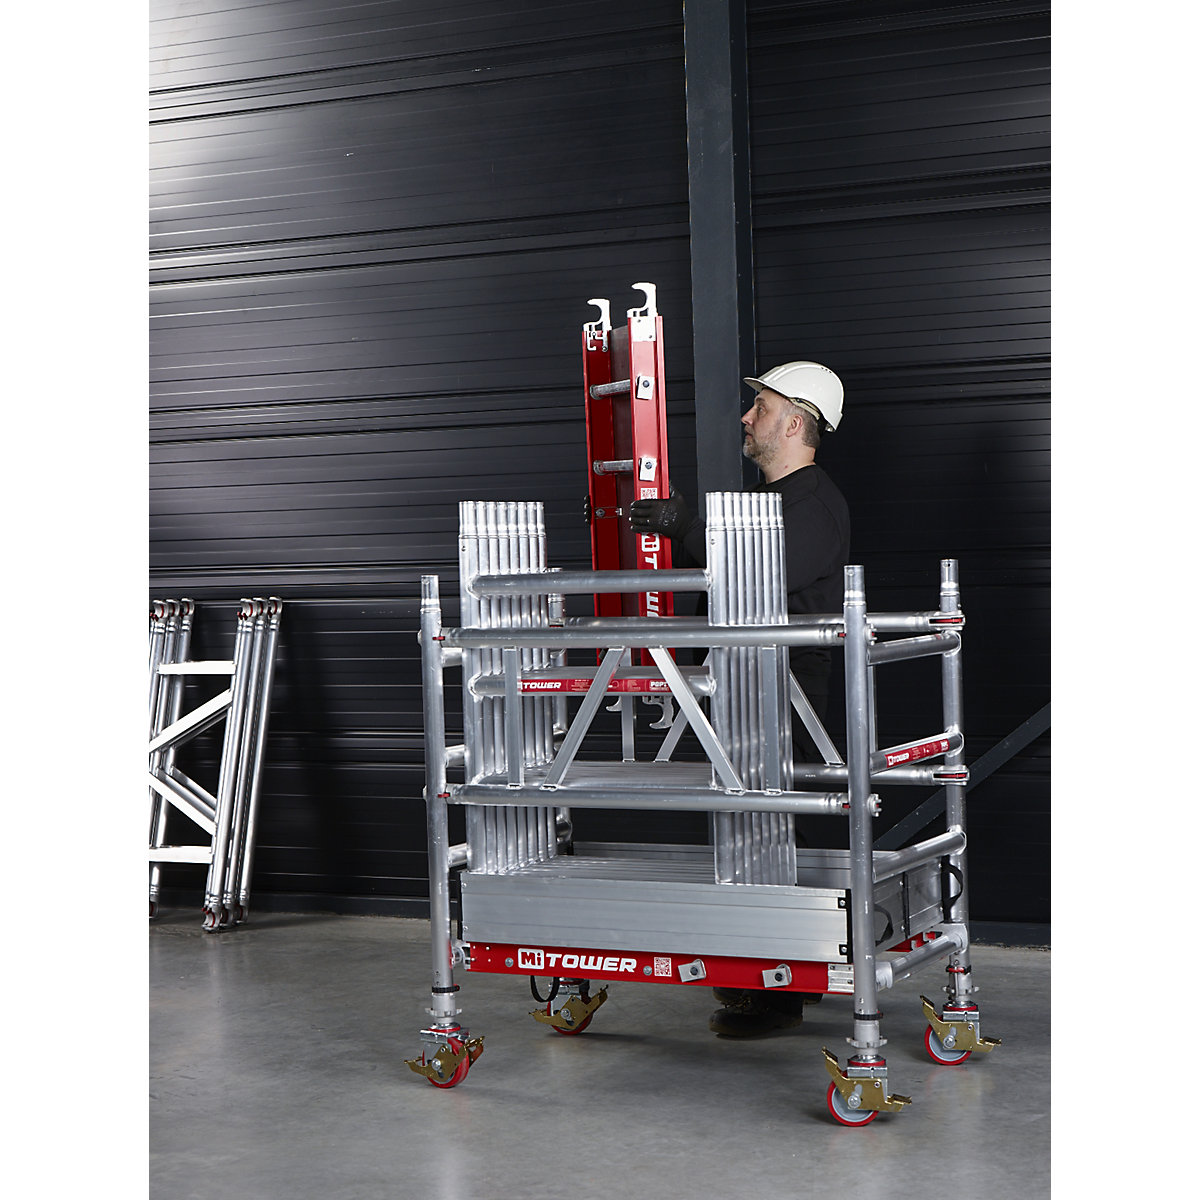 Standard MiTOWER quick assembly mobile access tower – Altrex (Product illustration 23)-22